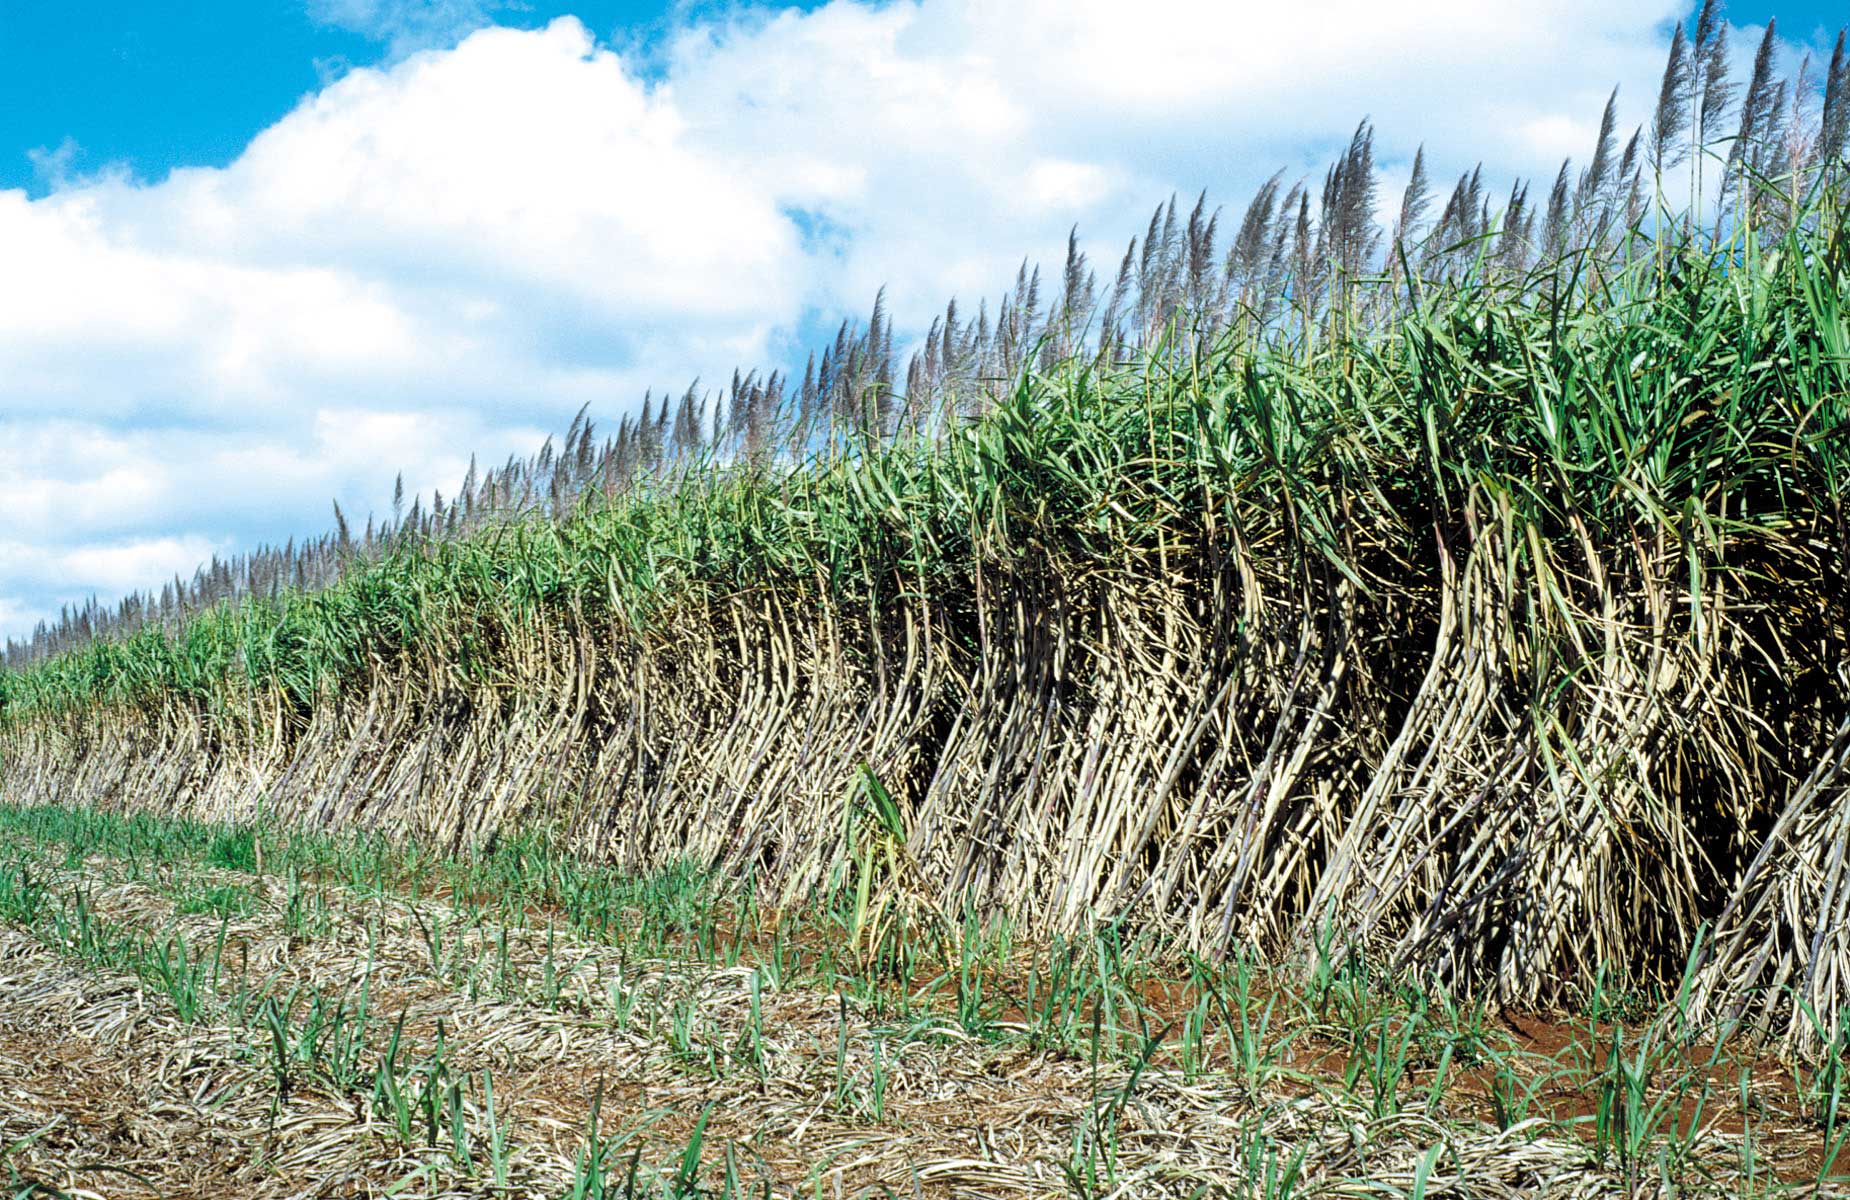 Photograph of a sugarcane field in Queensland, Australia. The photo shows a row of sugarcane plants running from left background to right foreground. A harvested area of the field is in front of them.